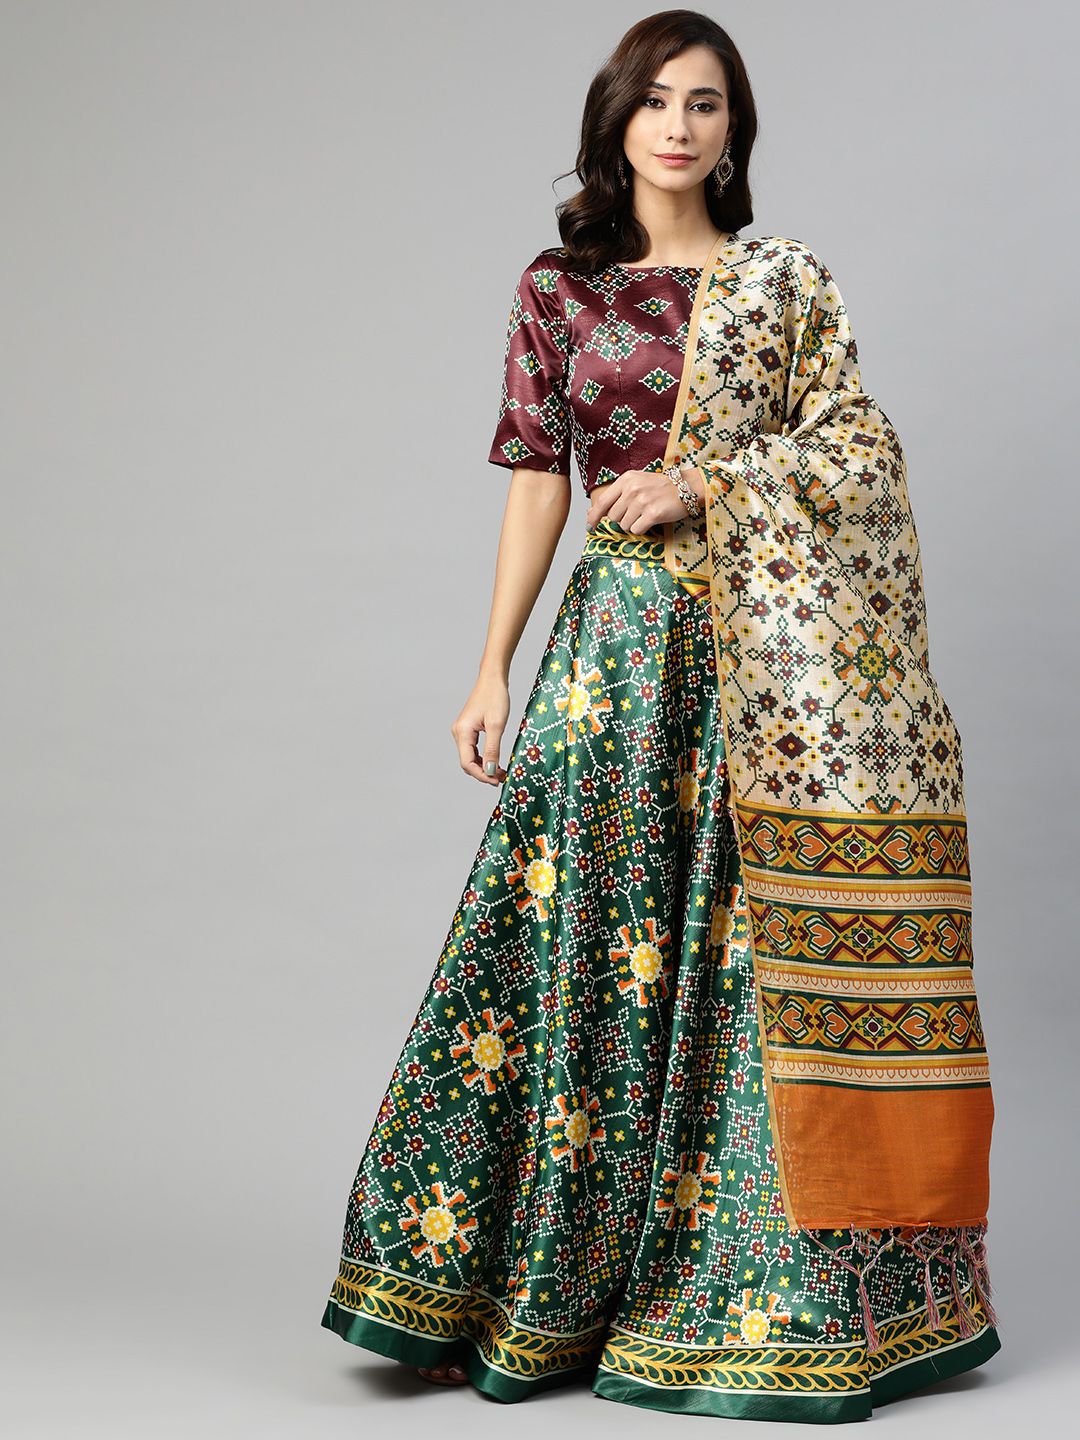 SHUBHVASTRA Purple & Green Printed Semi-Stitched Lehenga & Unstitched Blouse With Dupatta Price in India